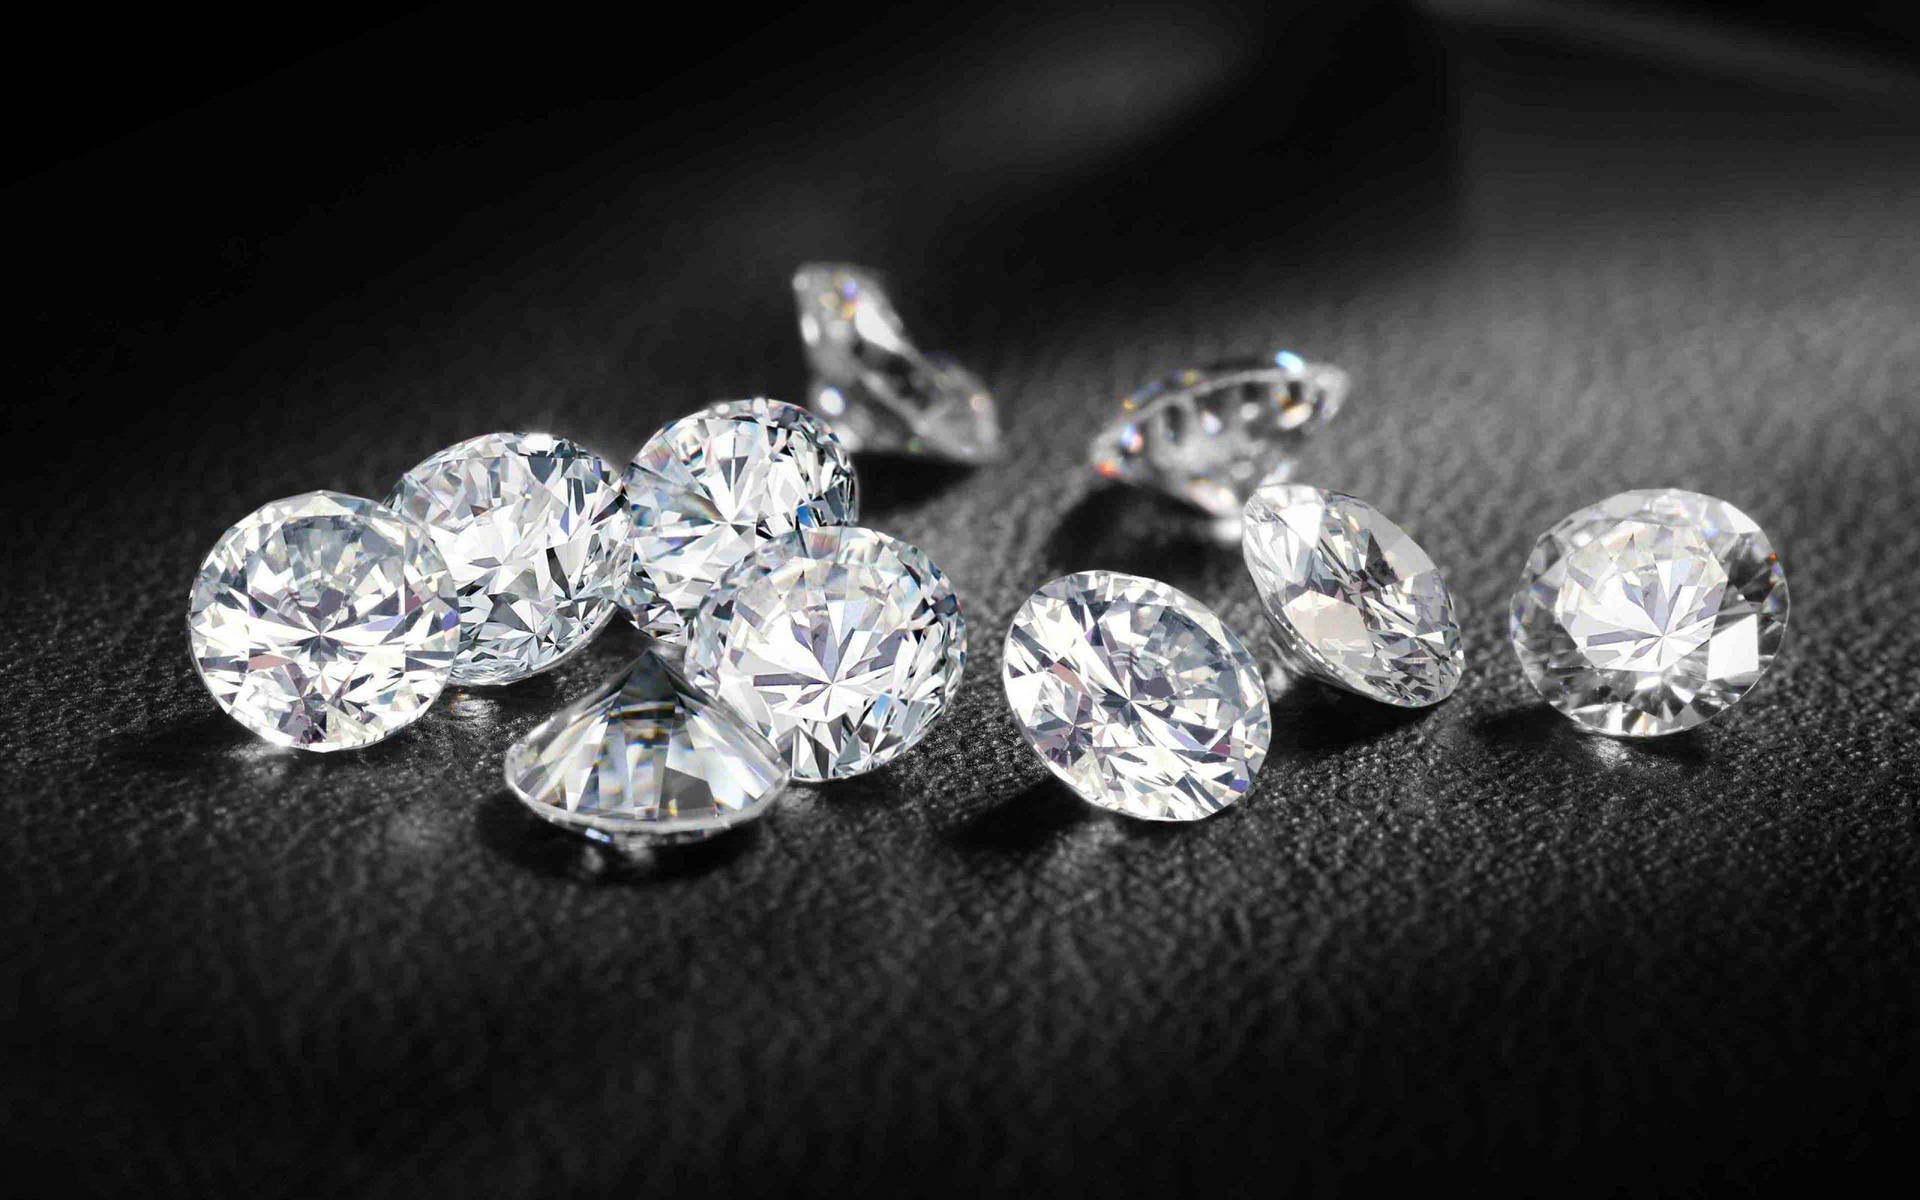 Diamond 2560X1600 Wallpaper and Background Image